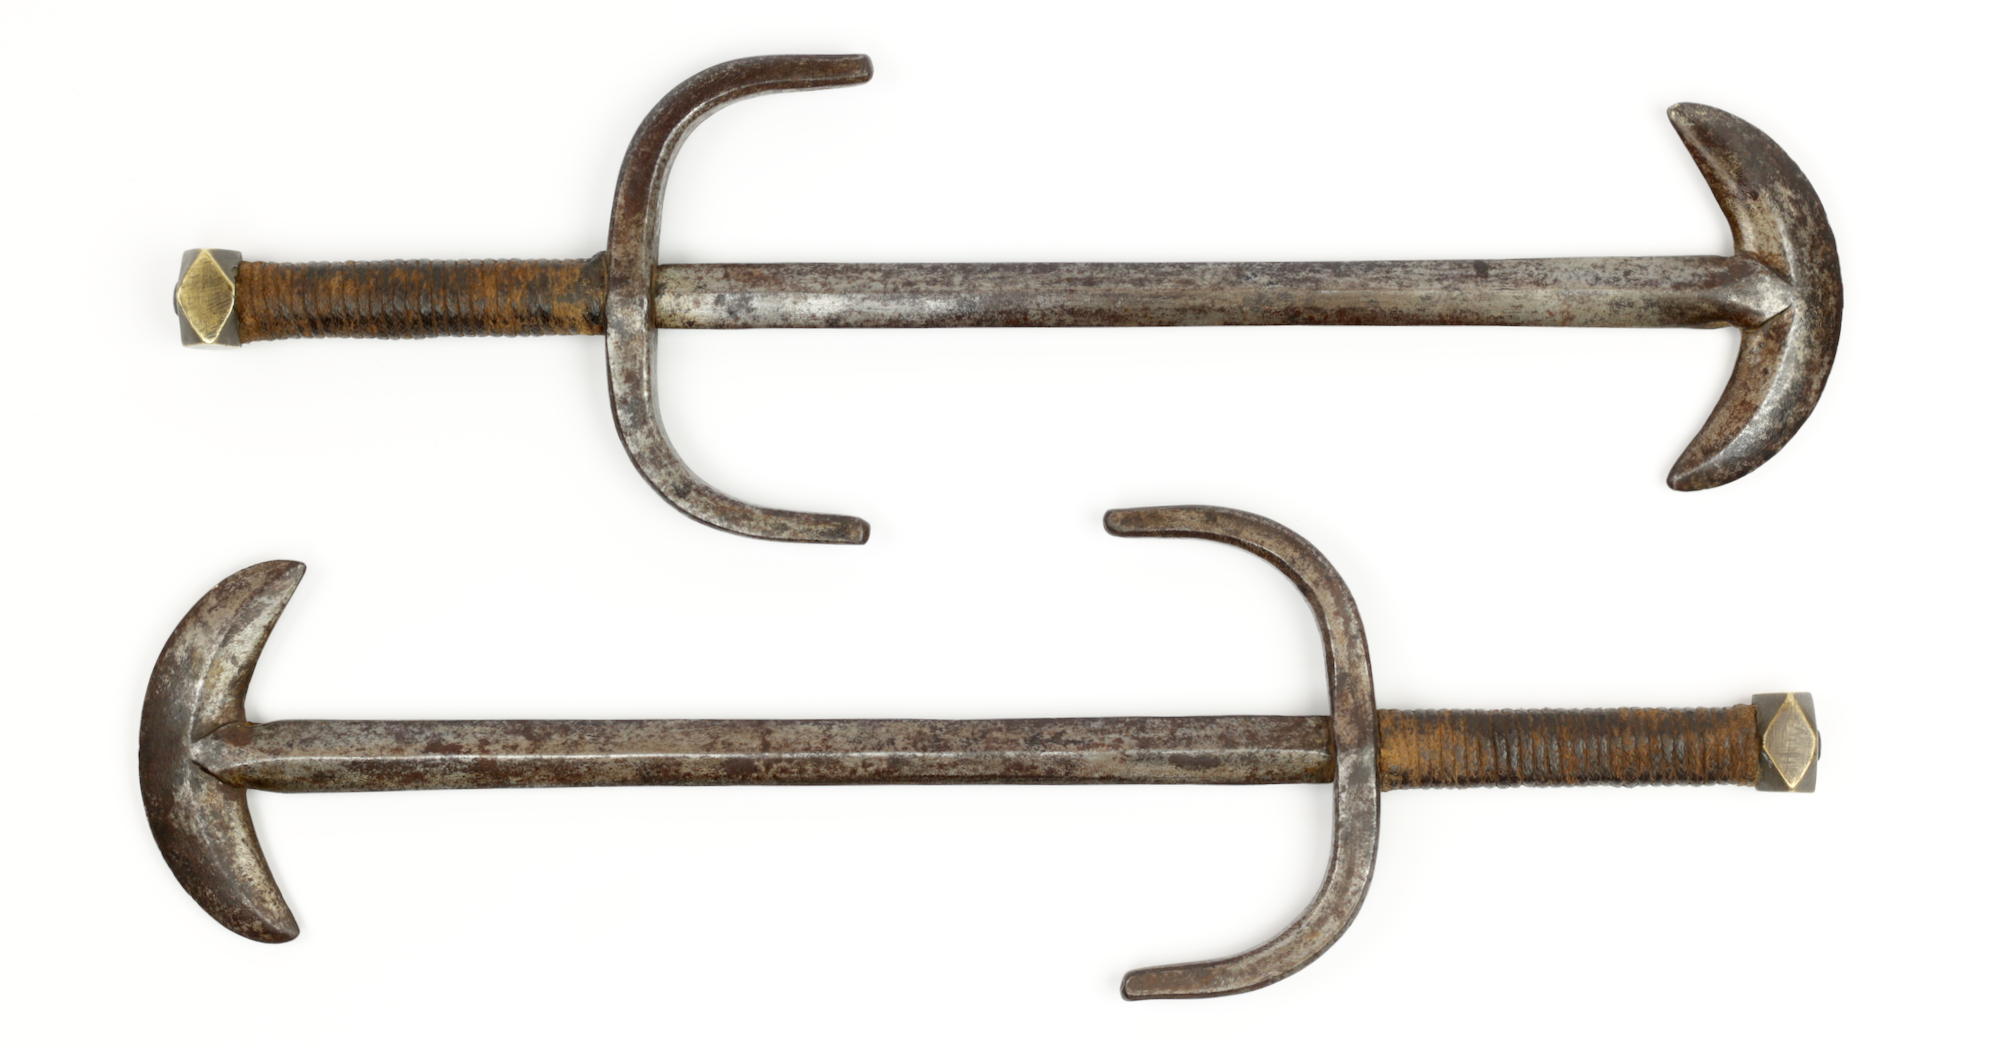 Chinese crescent moon weapons